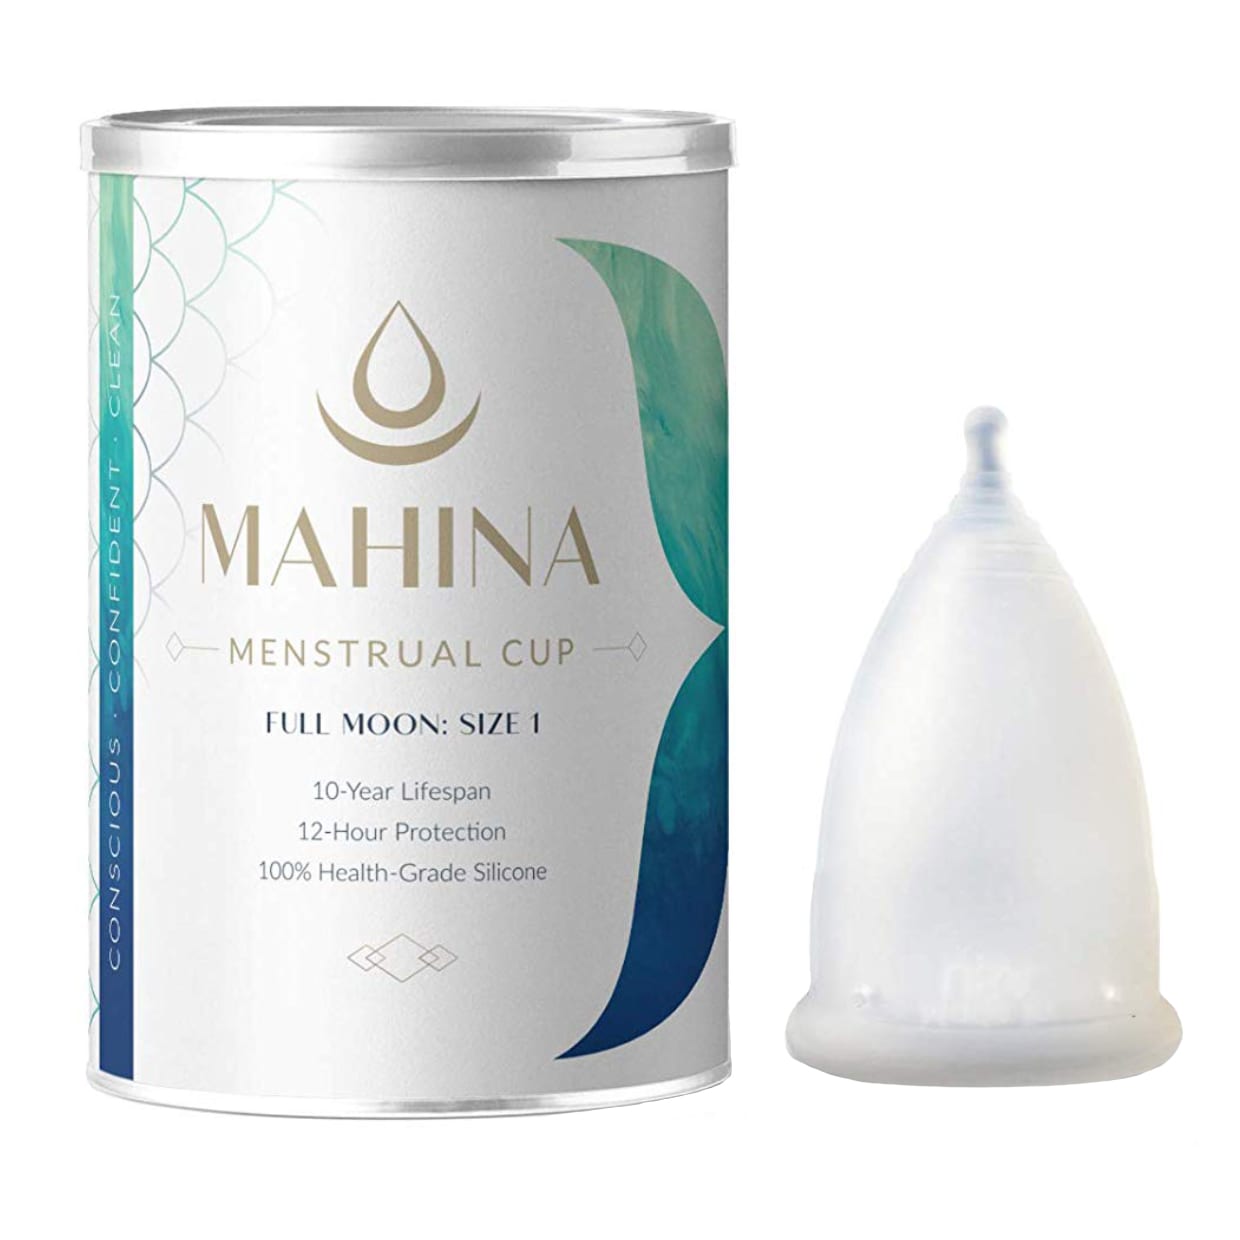 A silver can next to a plastic dome shaped menstrual cup.